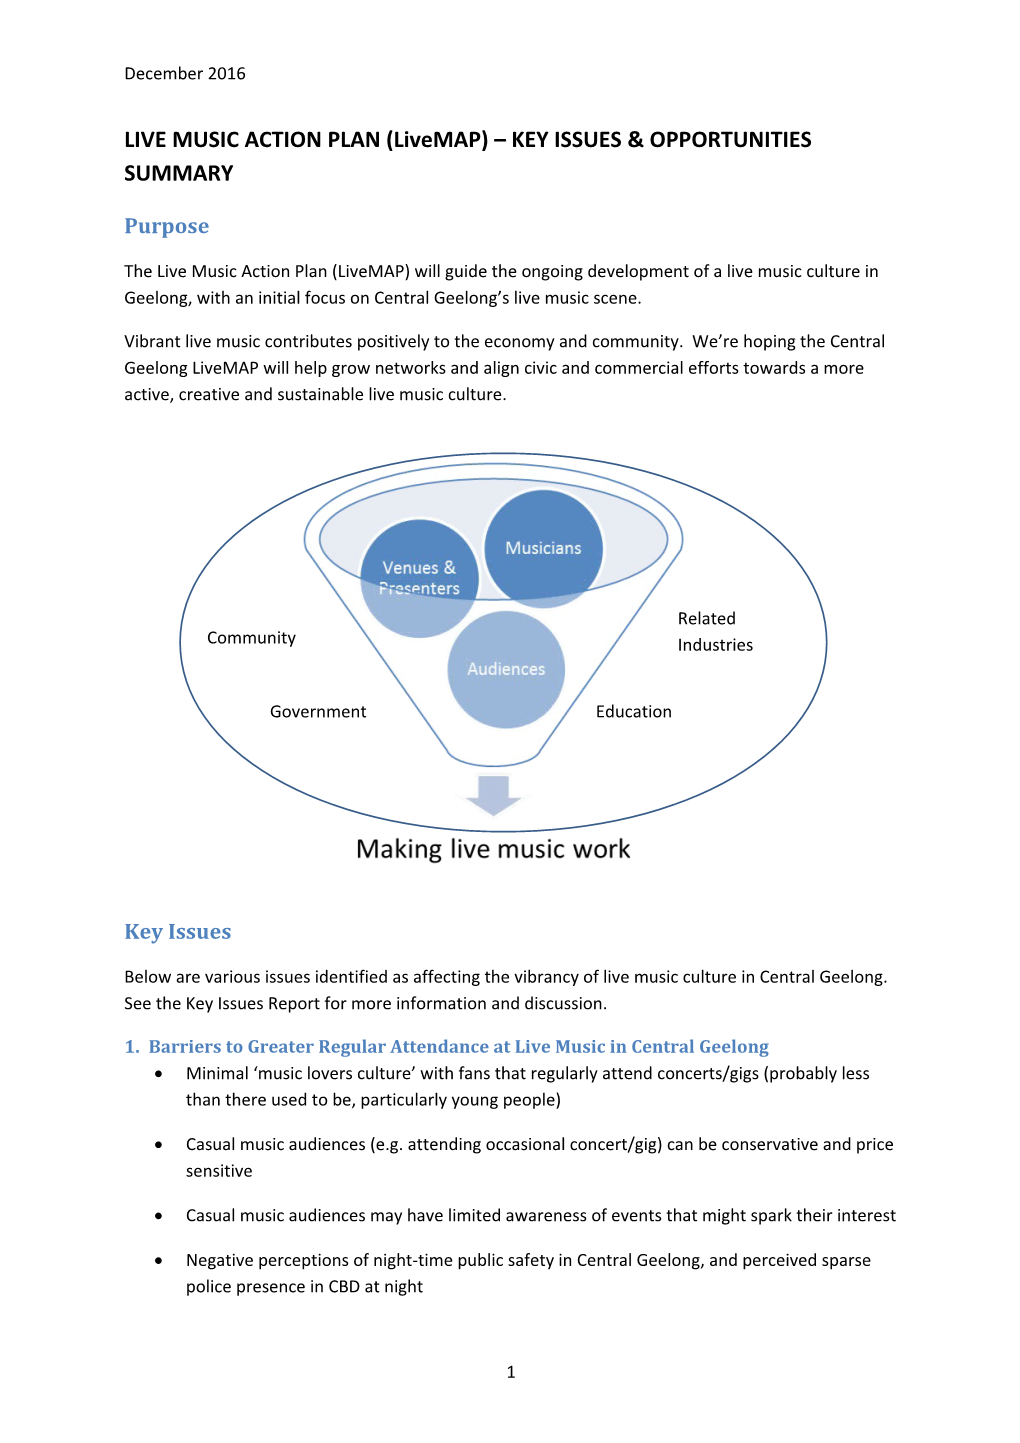 LIVE MUSIC ACTION PLAN (Livemap) KEY ISSUES & OPPORTUNITIES SUMMARY